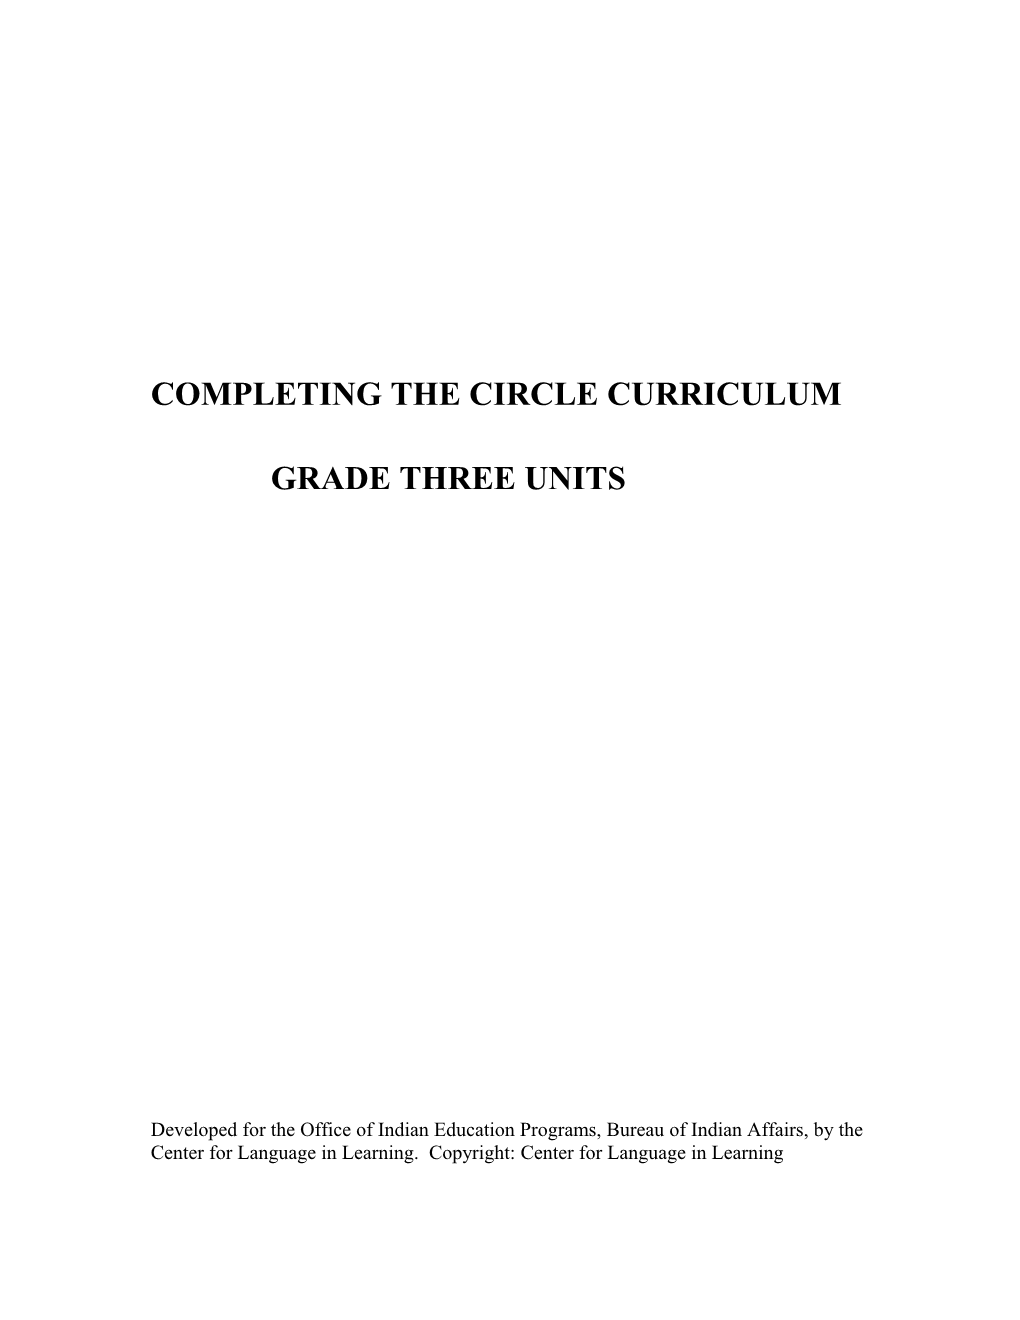 Completing the Circle Curriculum